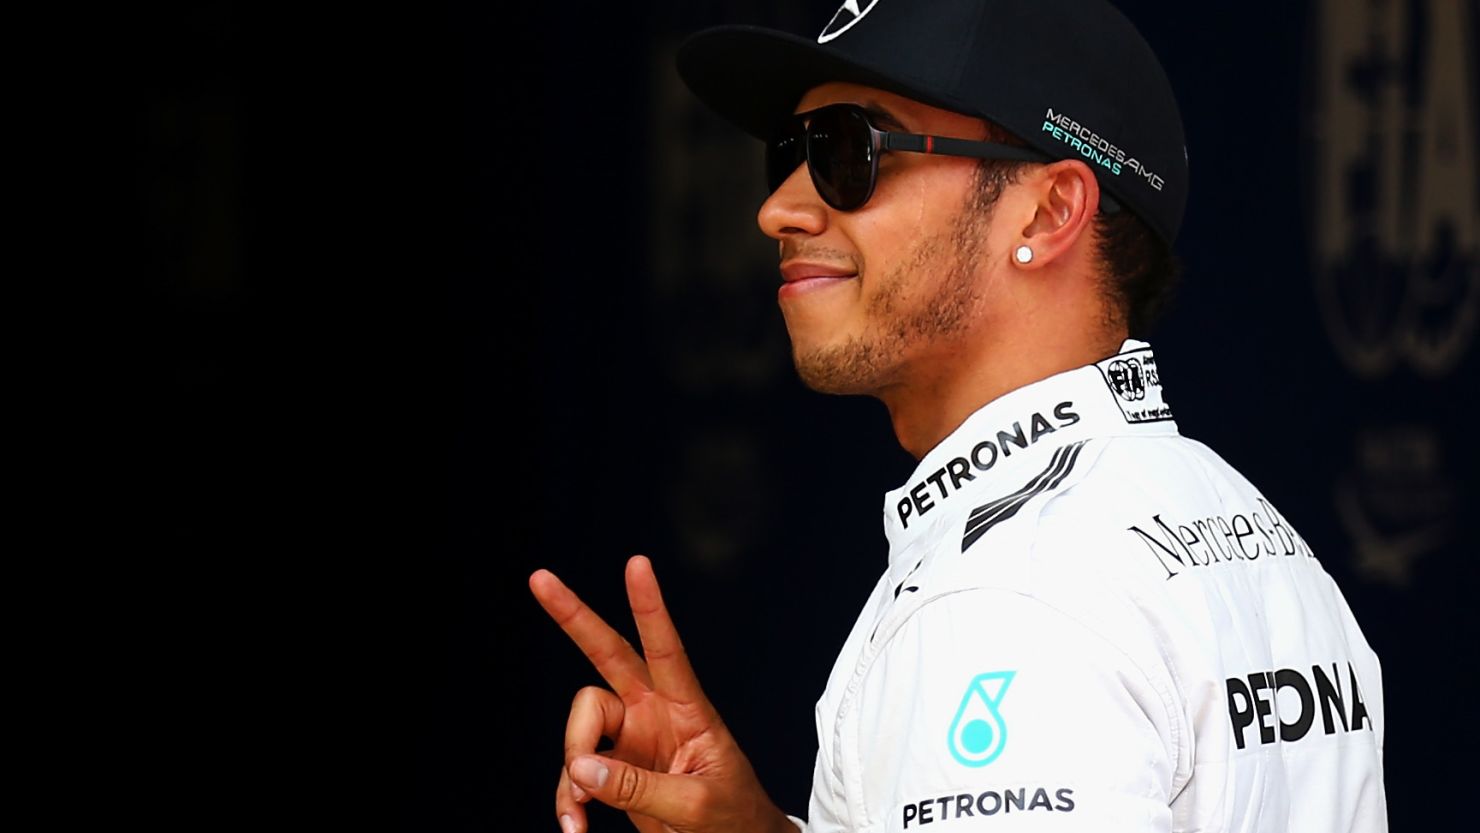 Lewis Hamilton celebrates his fourth pole of the season after topping the timesheets in Barcelona.